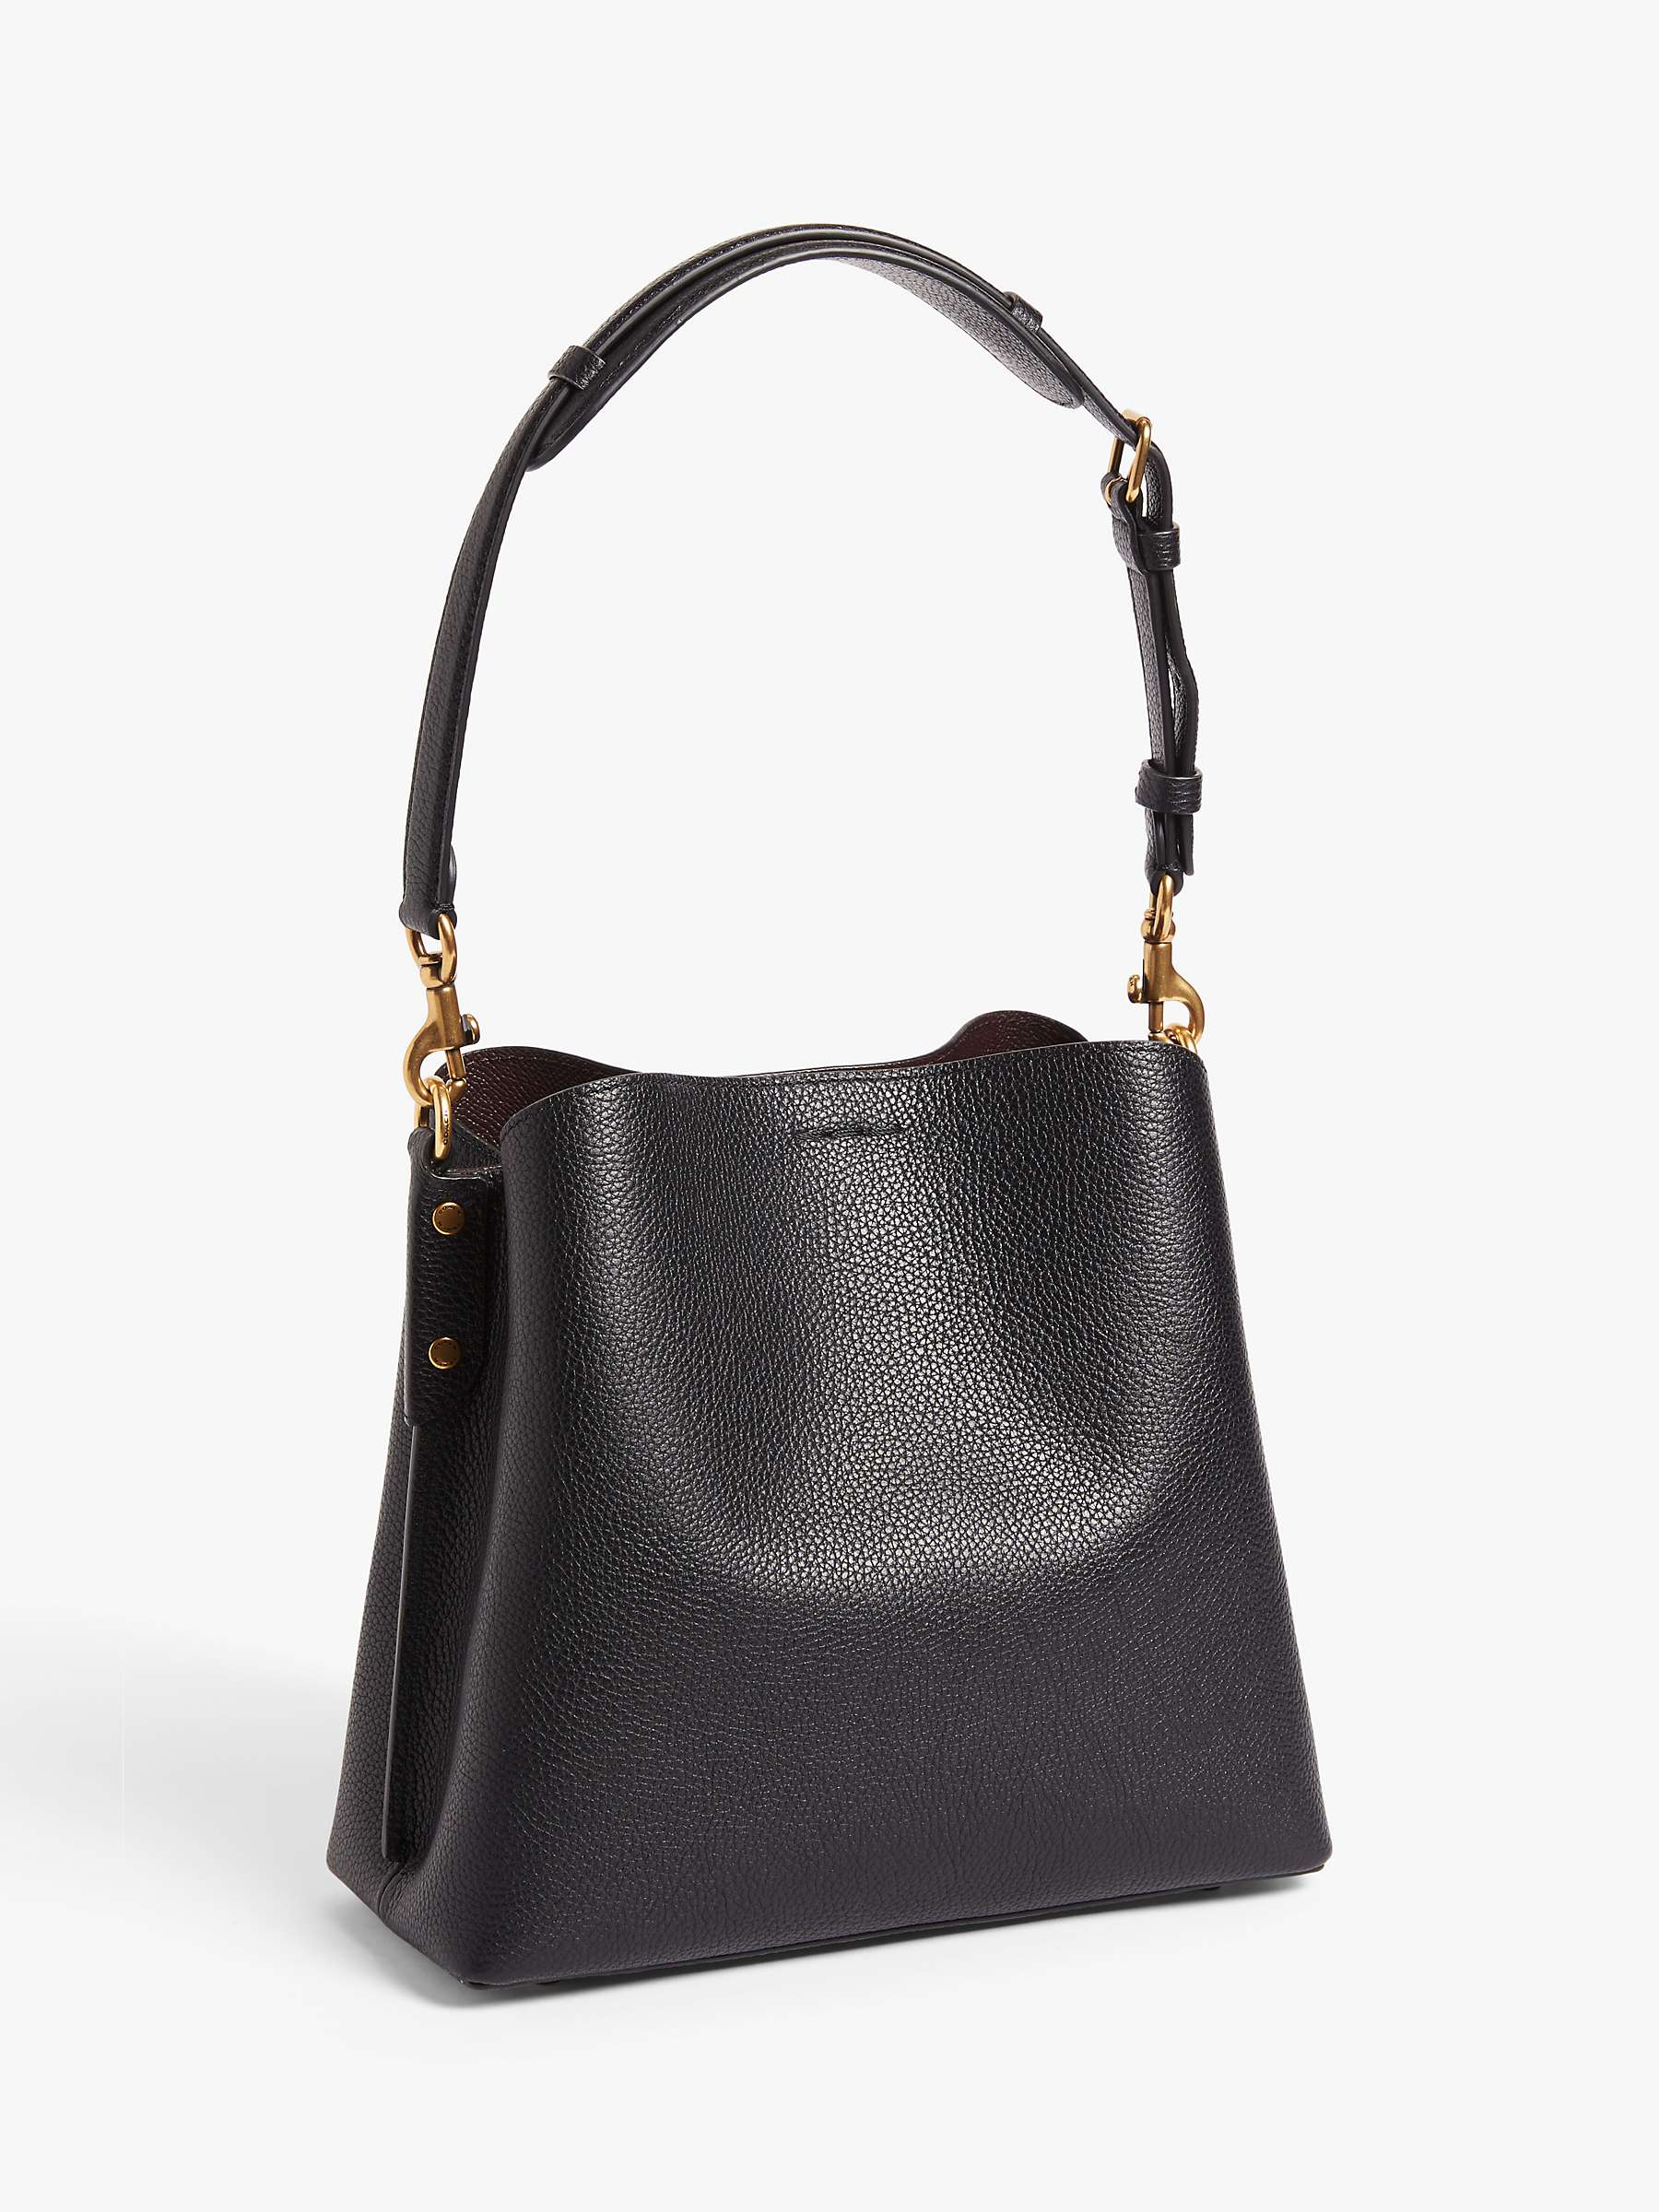 Coach Willow Leather Bucket Bag, Black at John Lewis & Partners